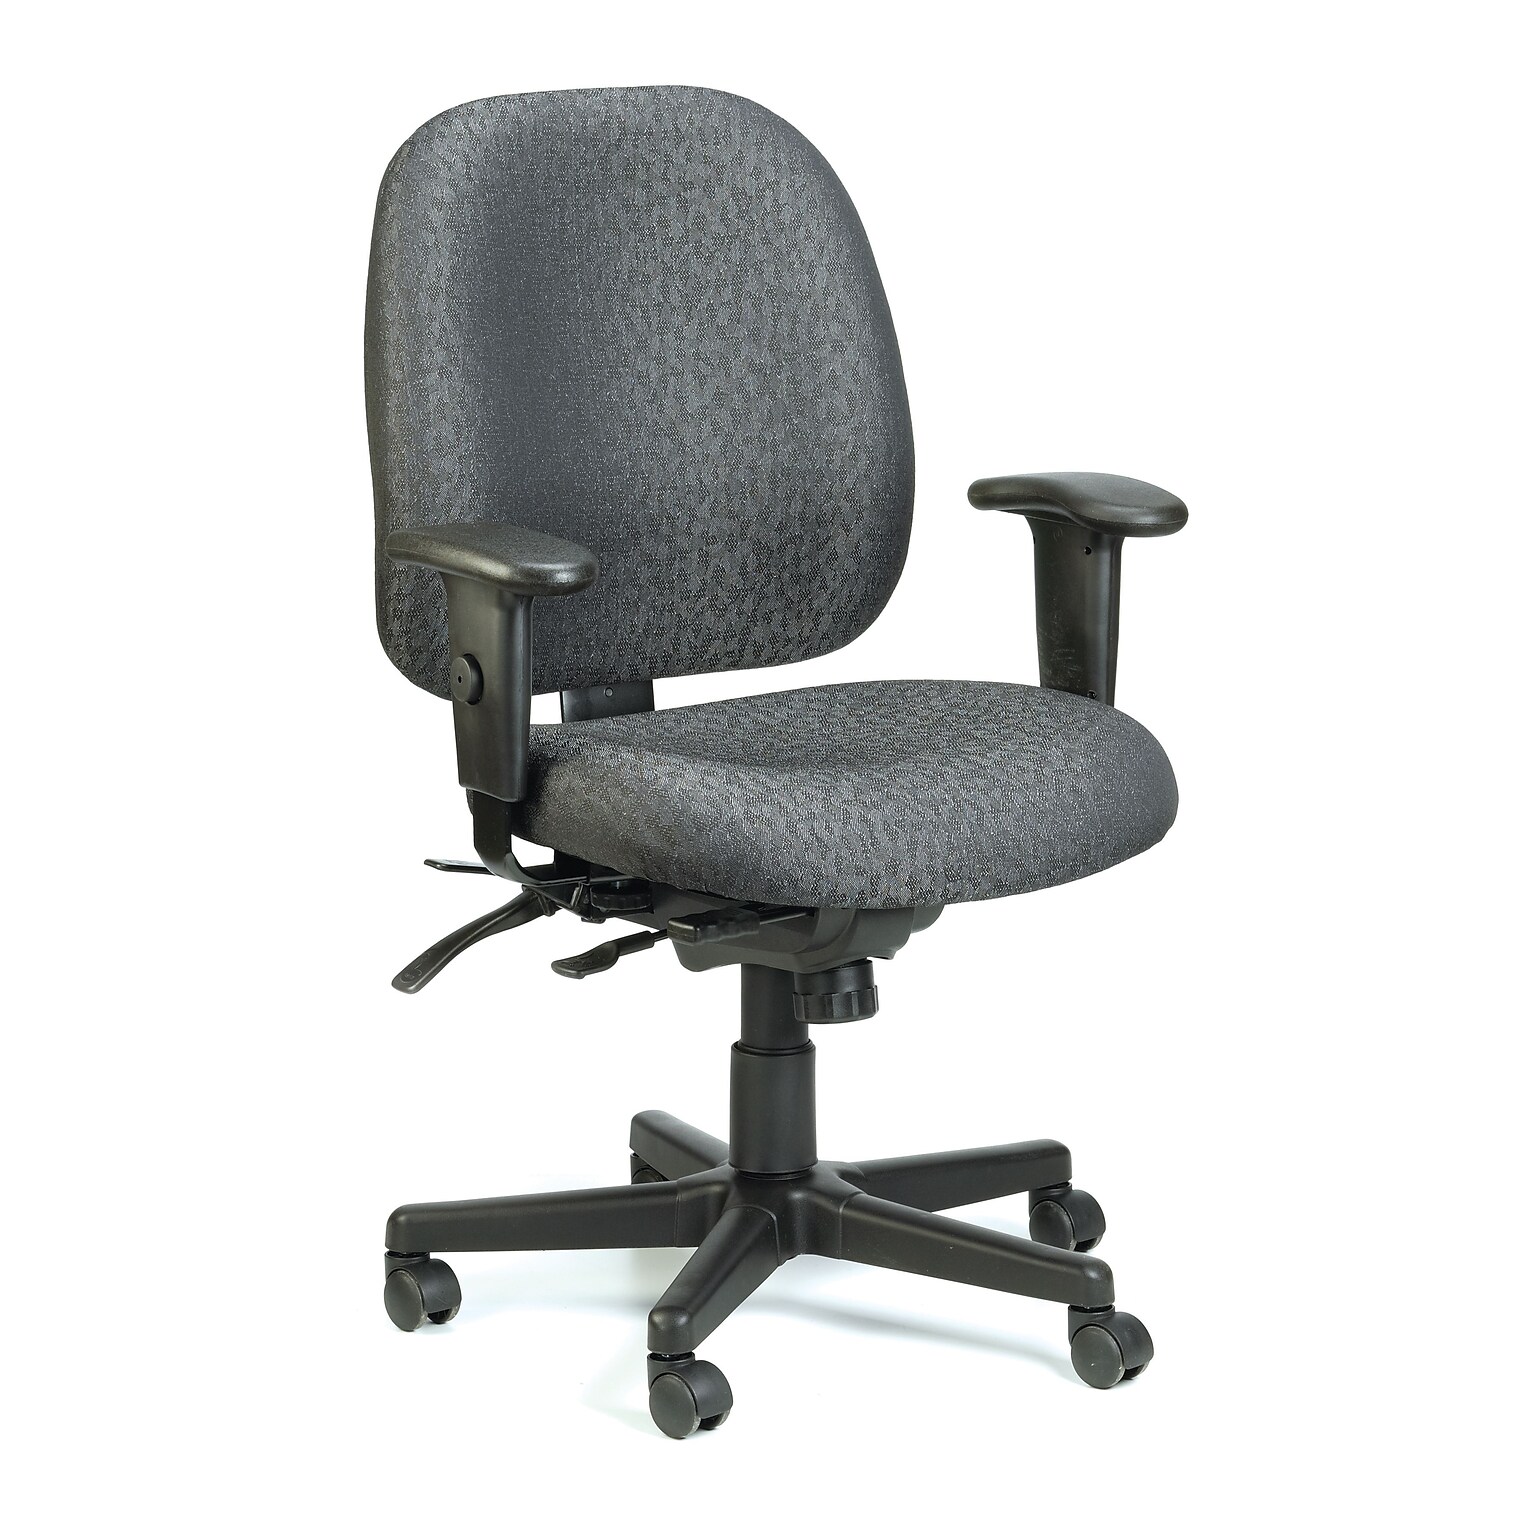 Raynor Eurotech Fabric 4 x 4 Multi-function Task Chair, Charcoal